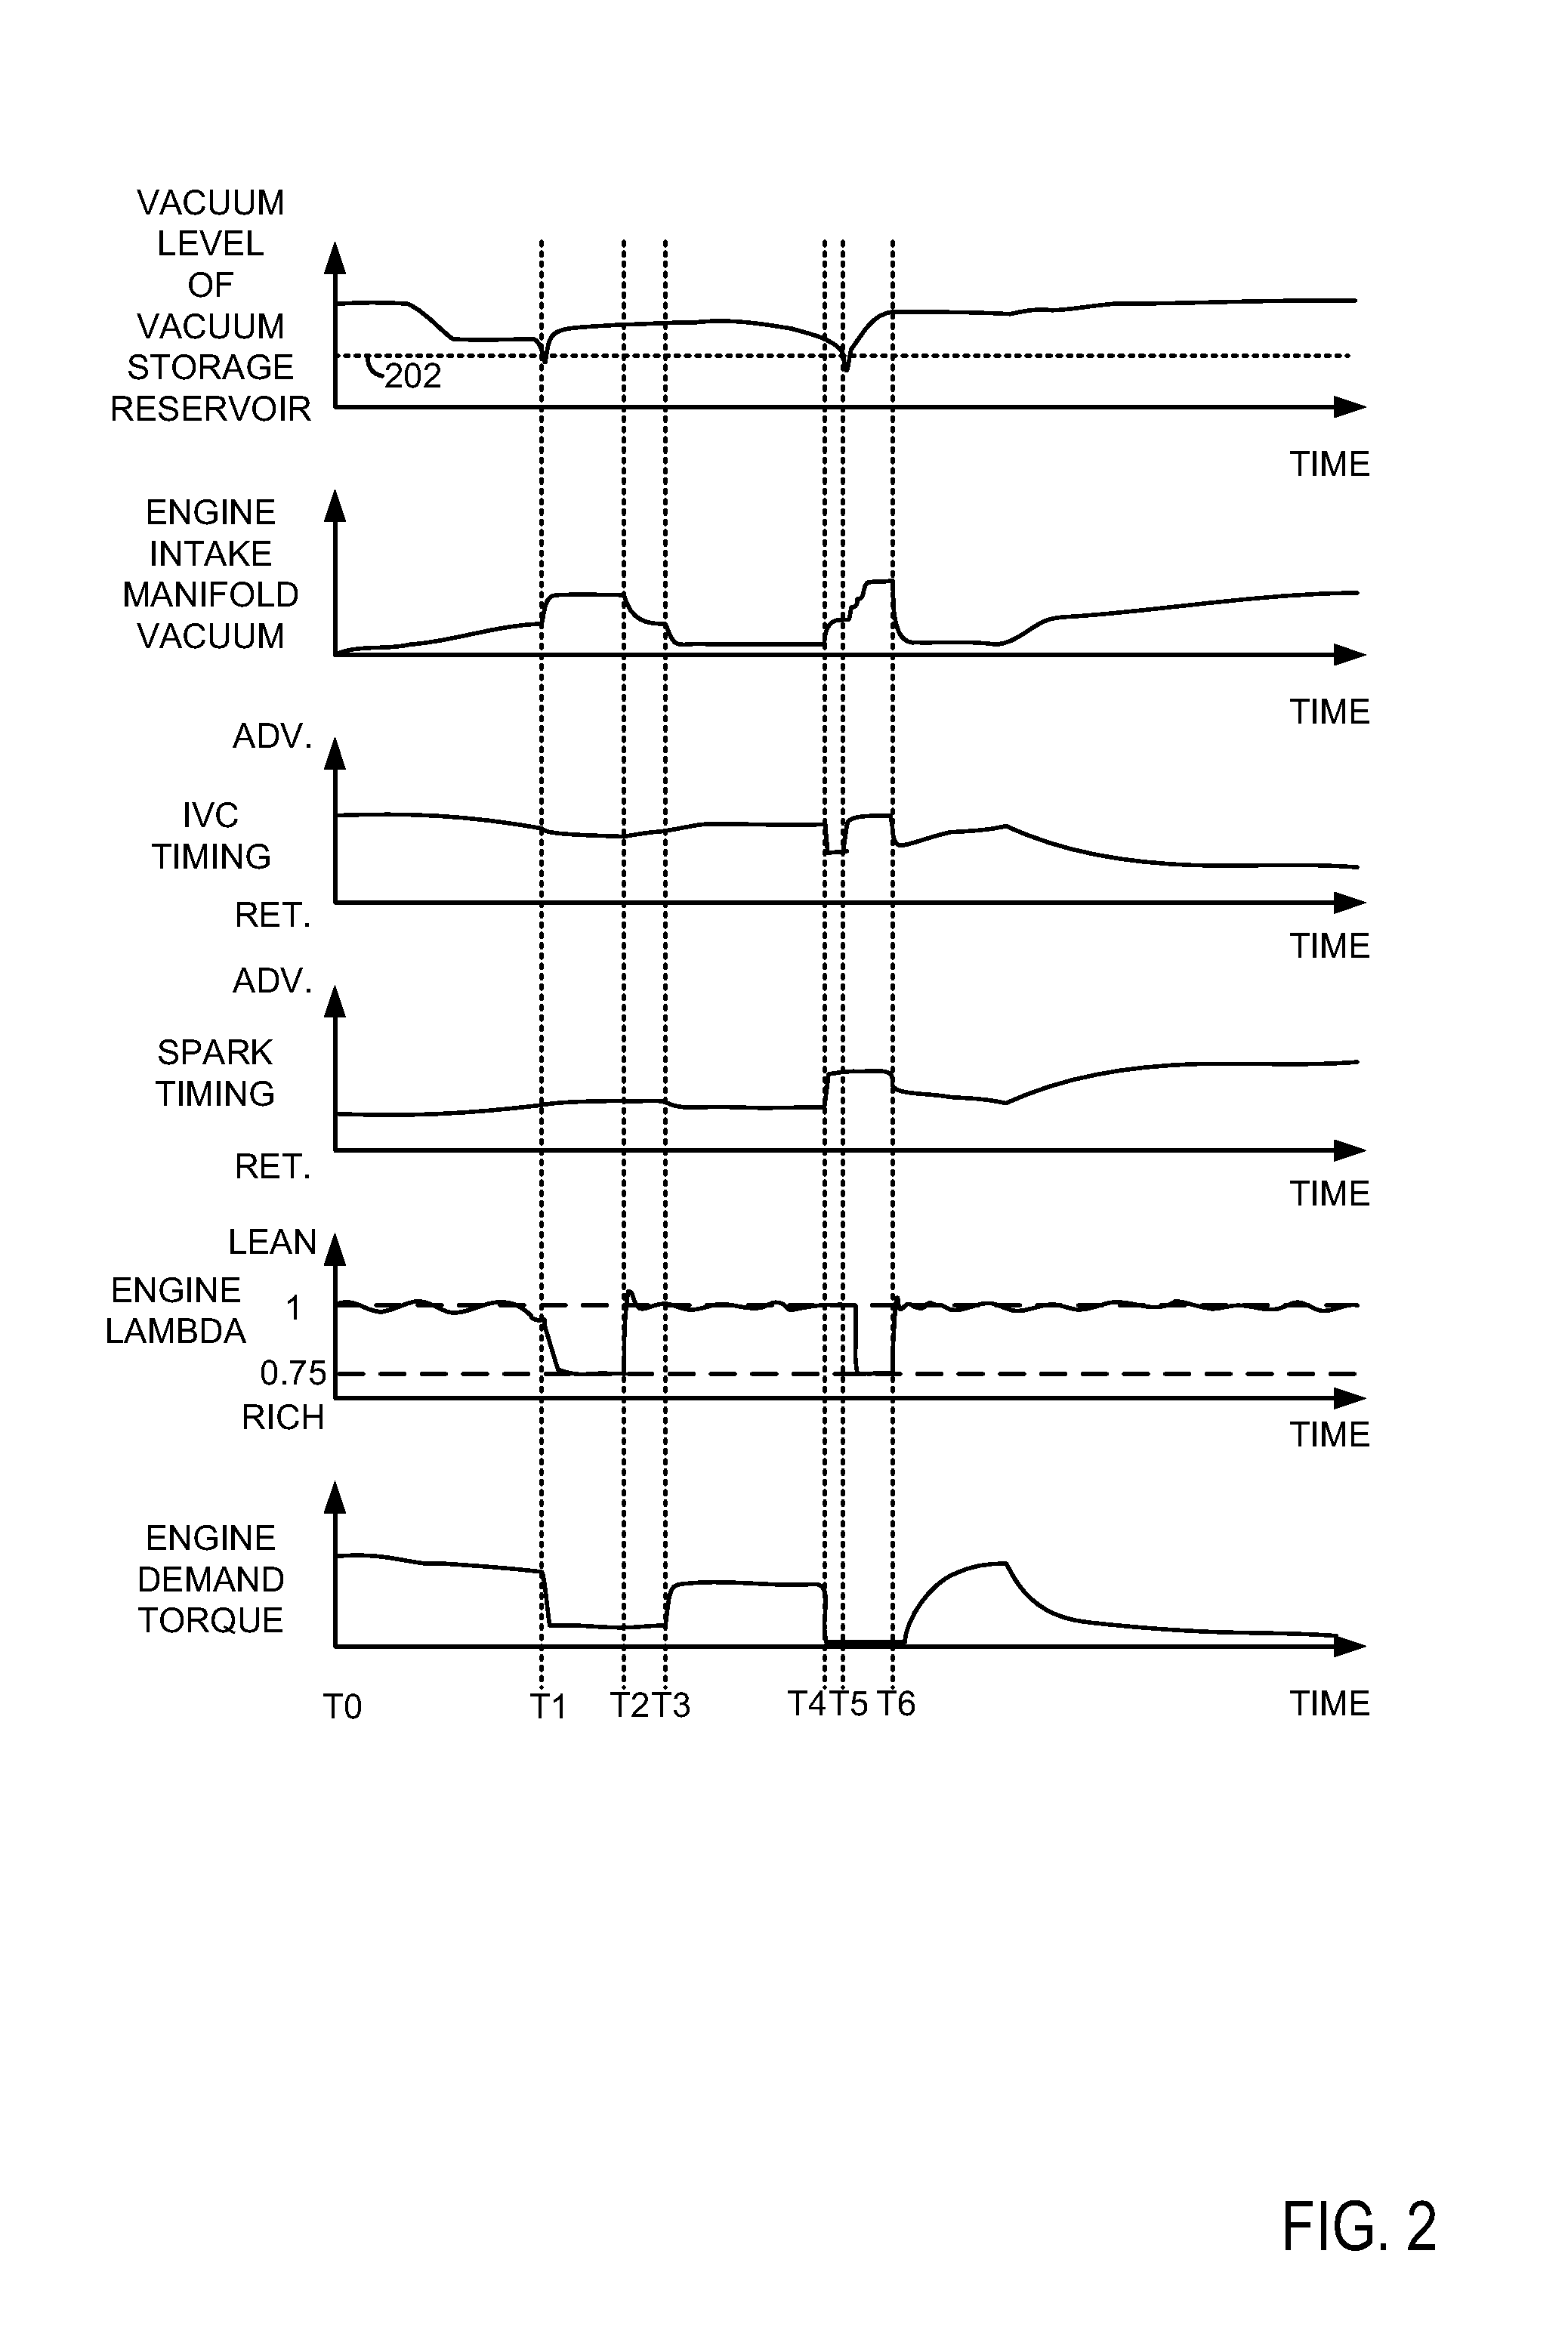 Method for increasing vacuum production for a vehicle